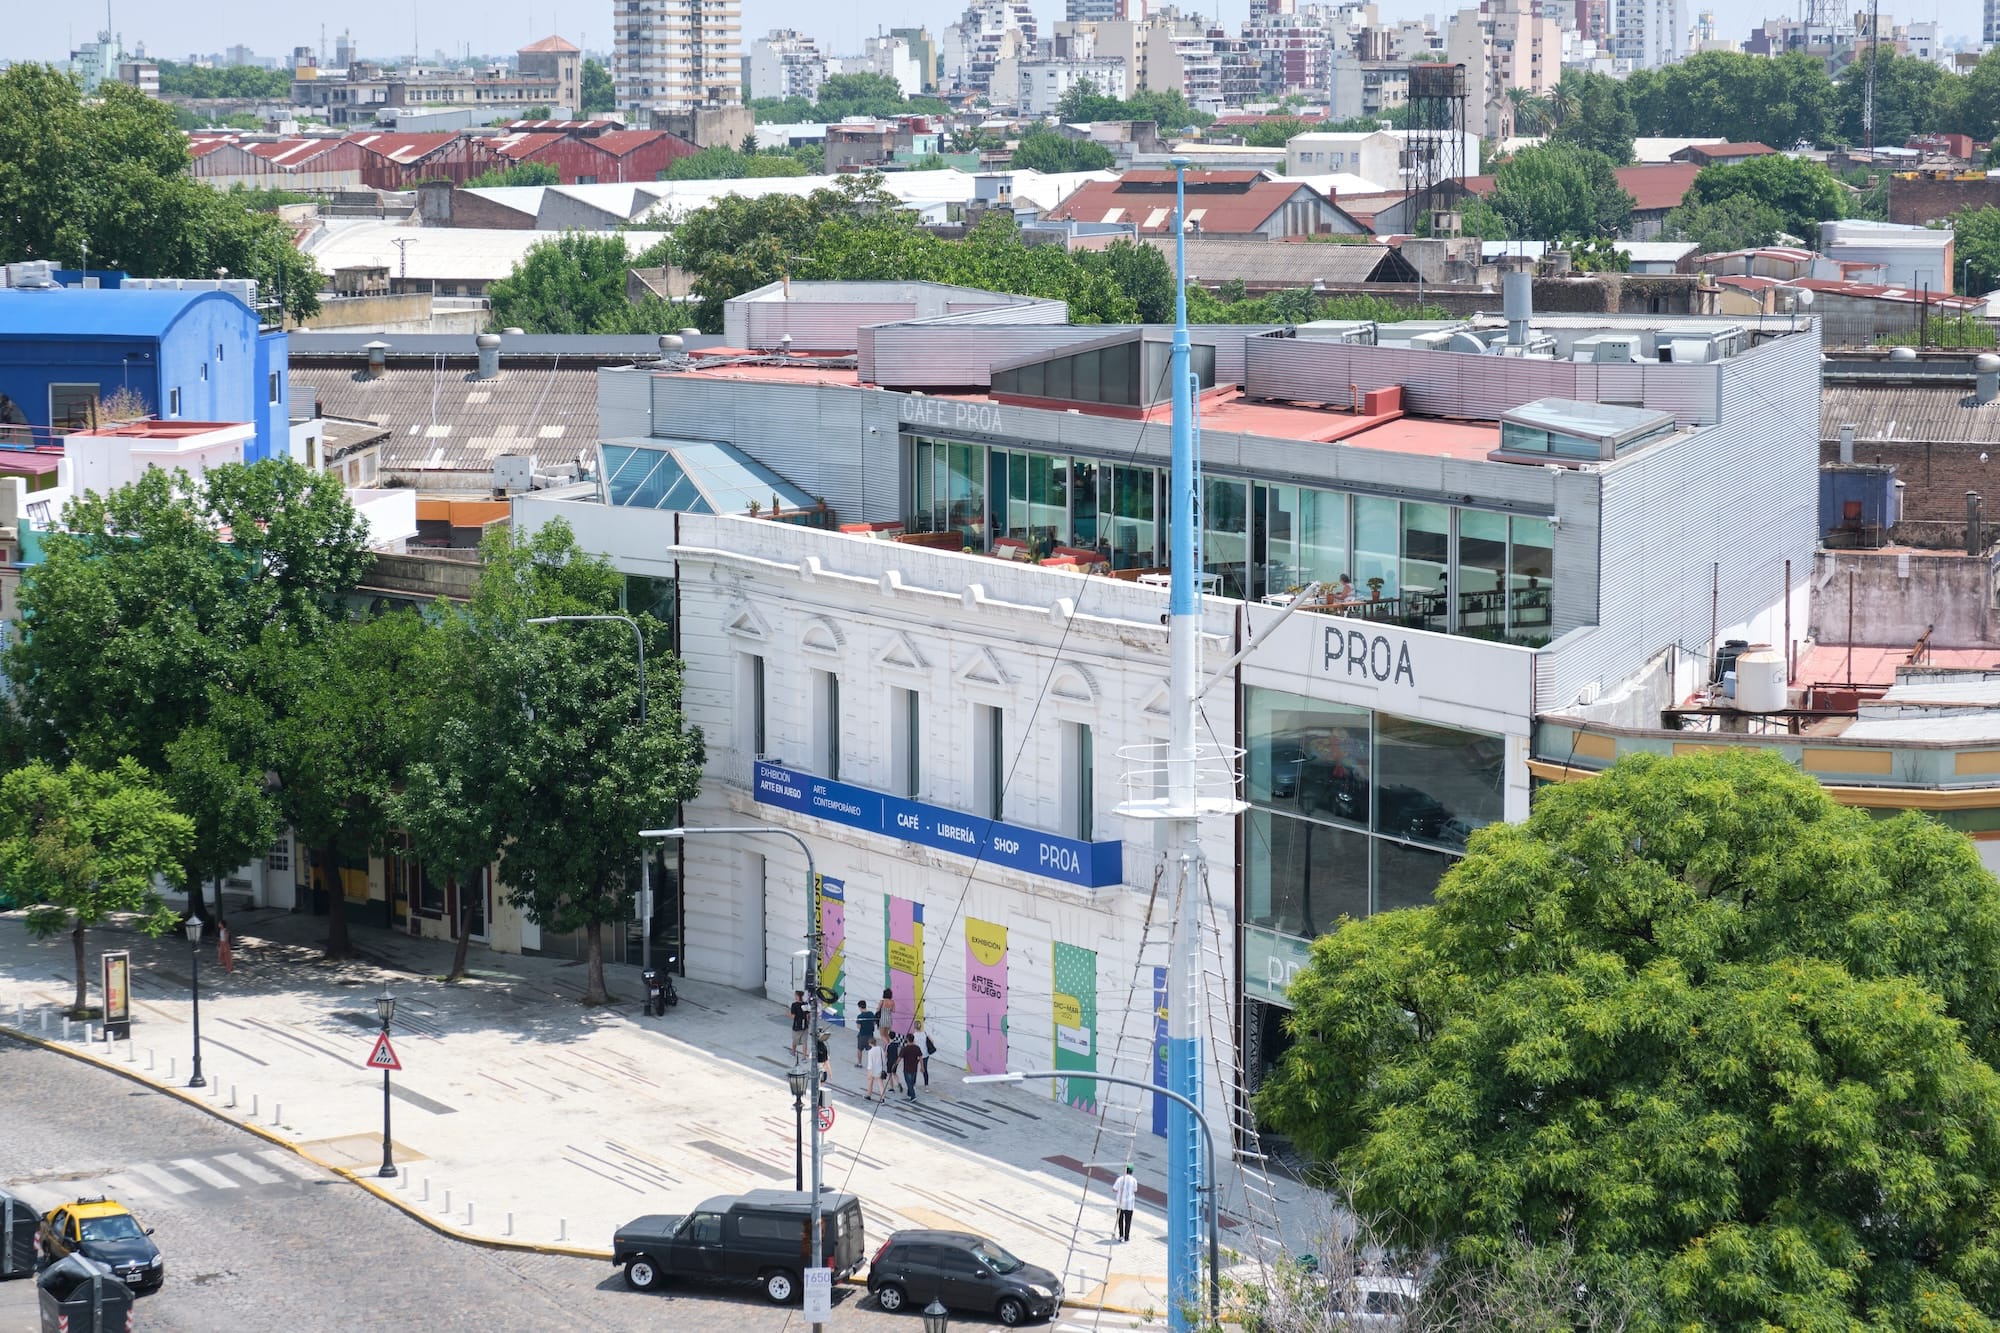 Fundacion Proa Museums in Buenos Aires